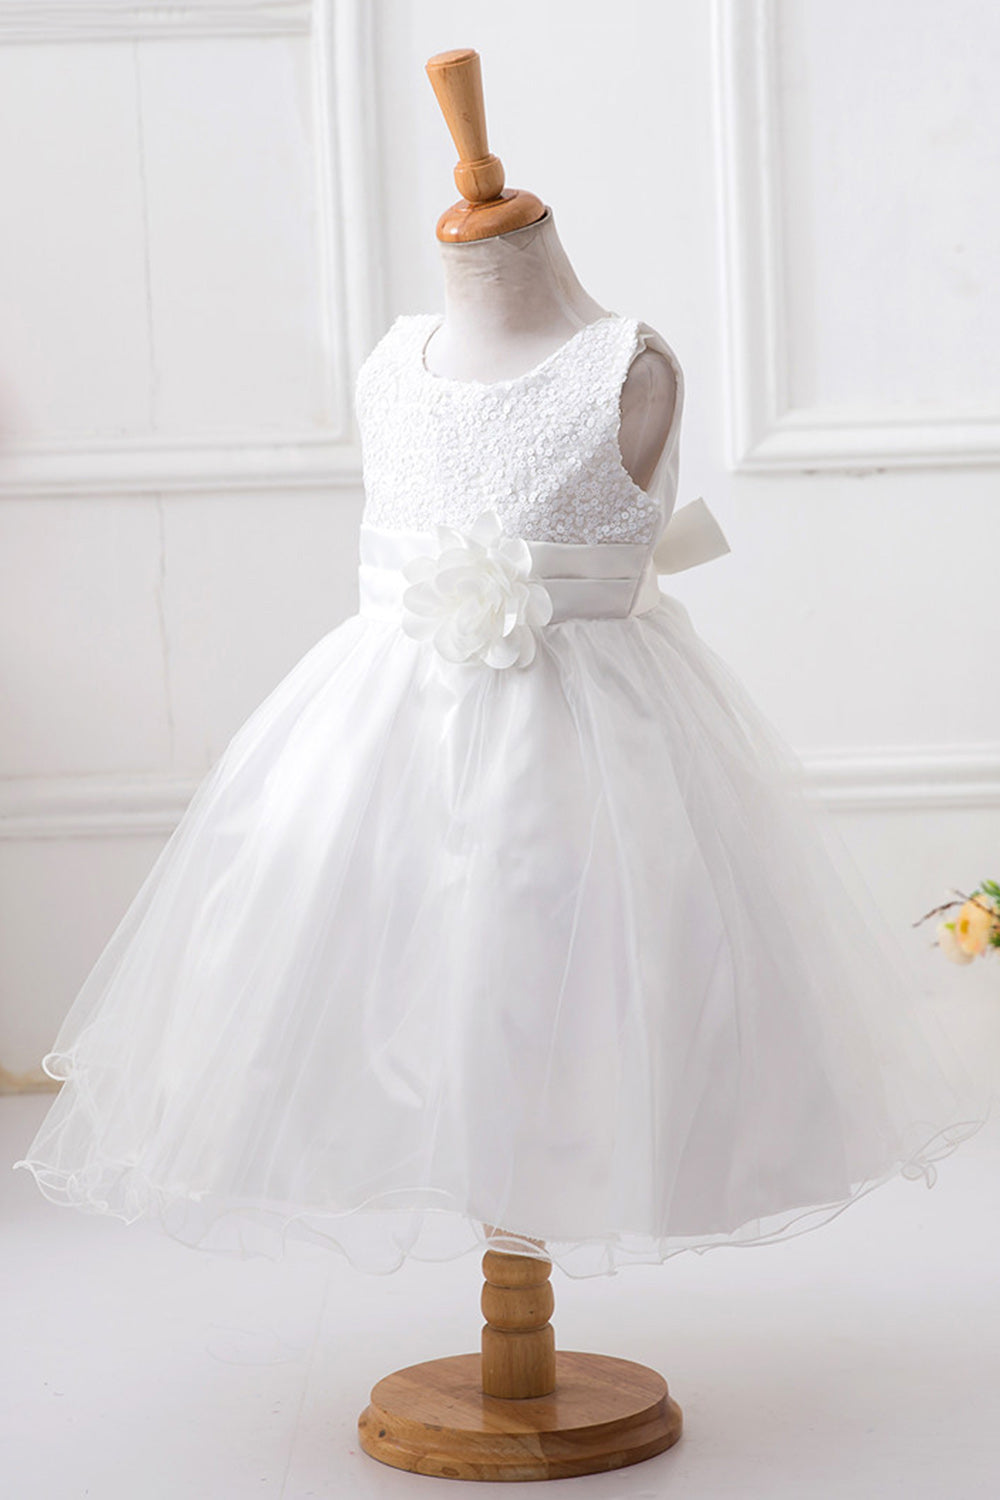 Sequins Sleeveless White Girls Dresses with Bowknot